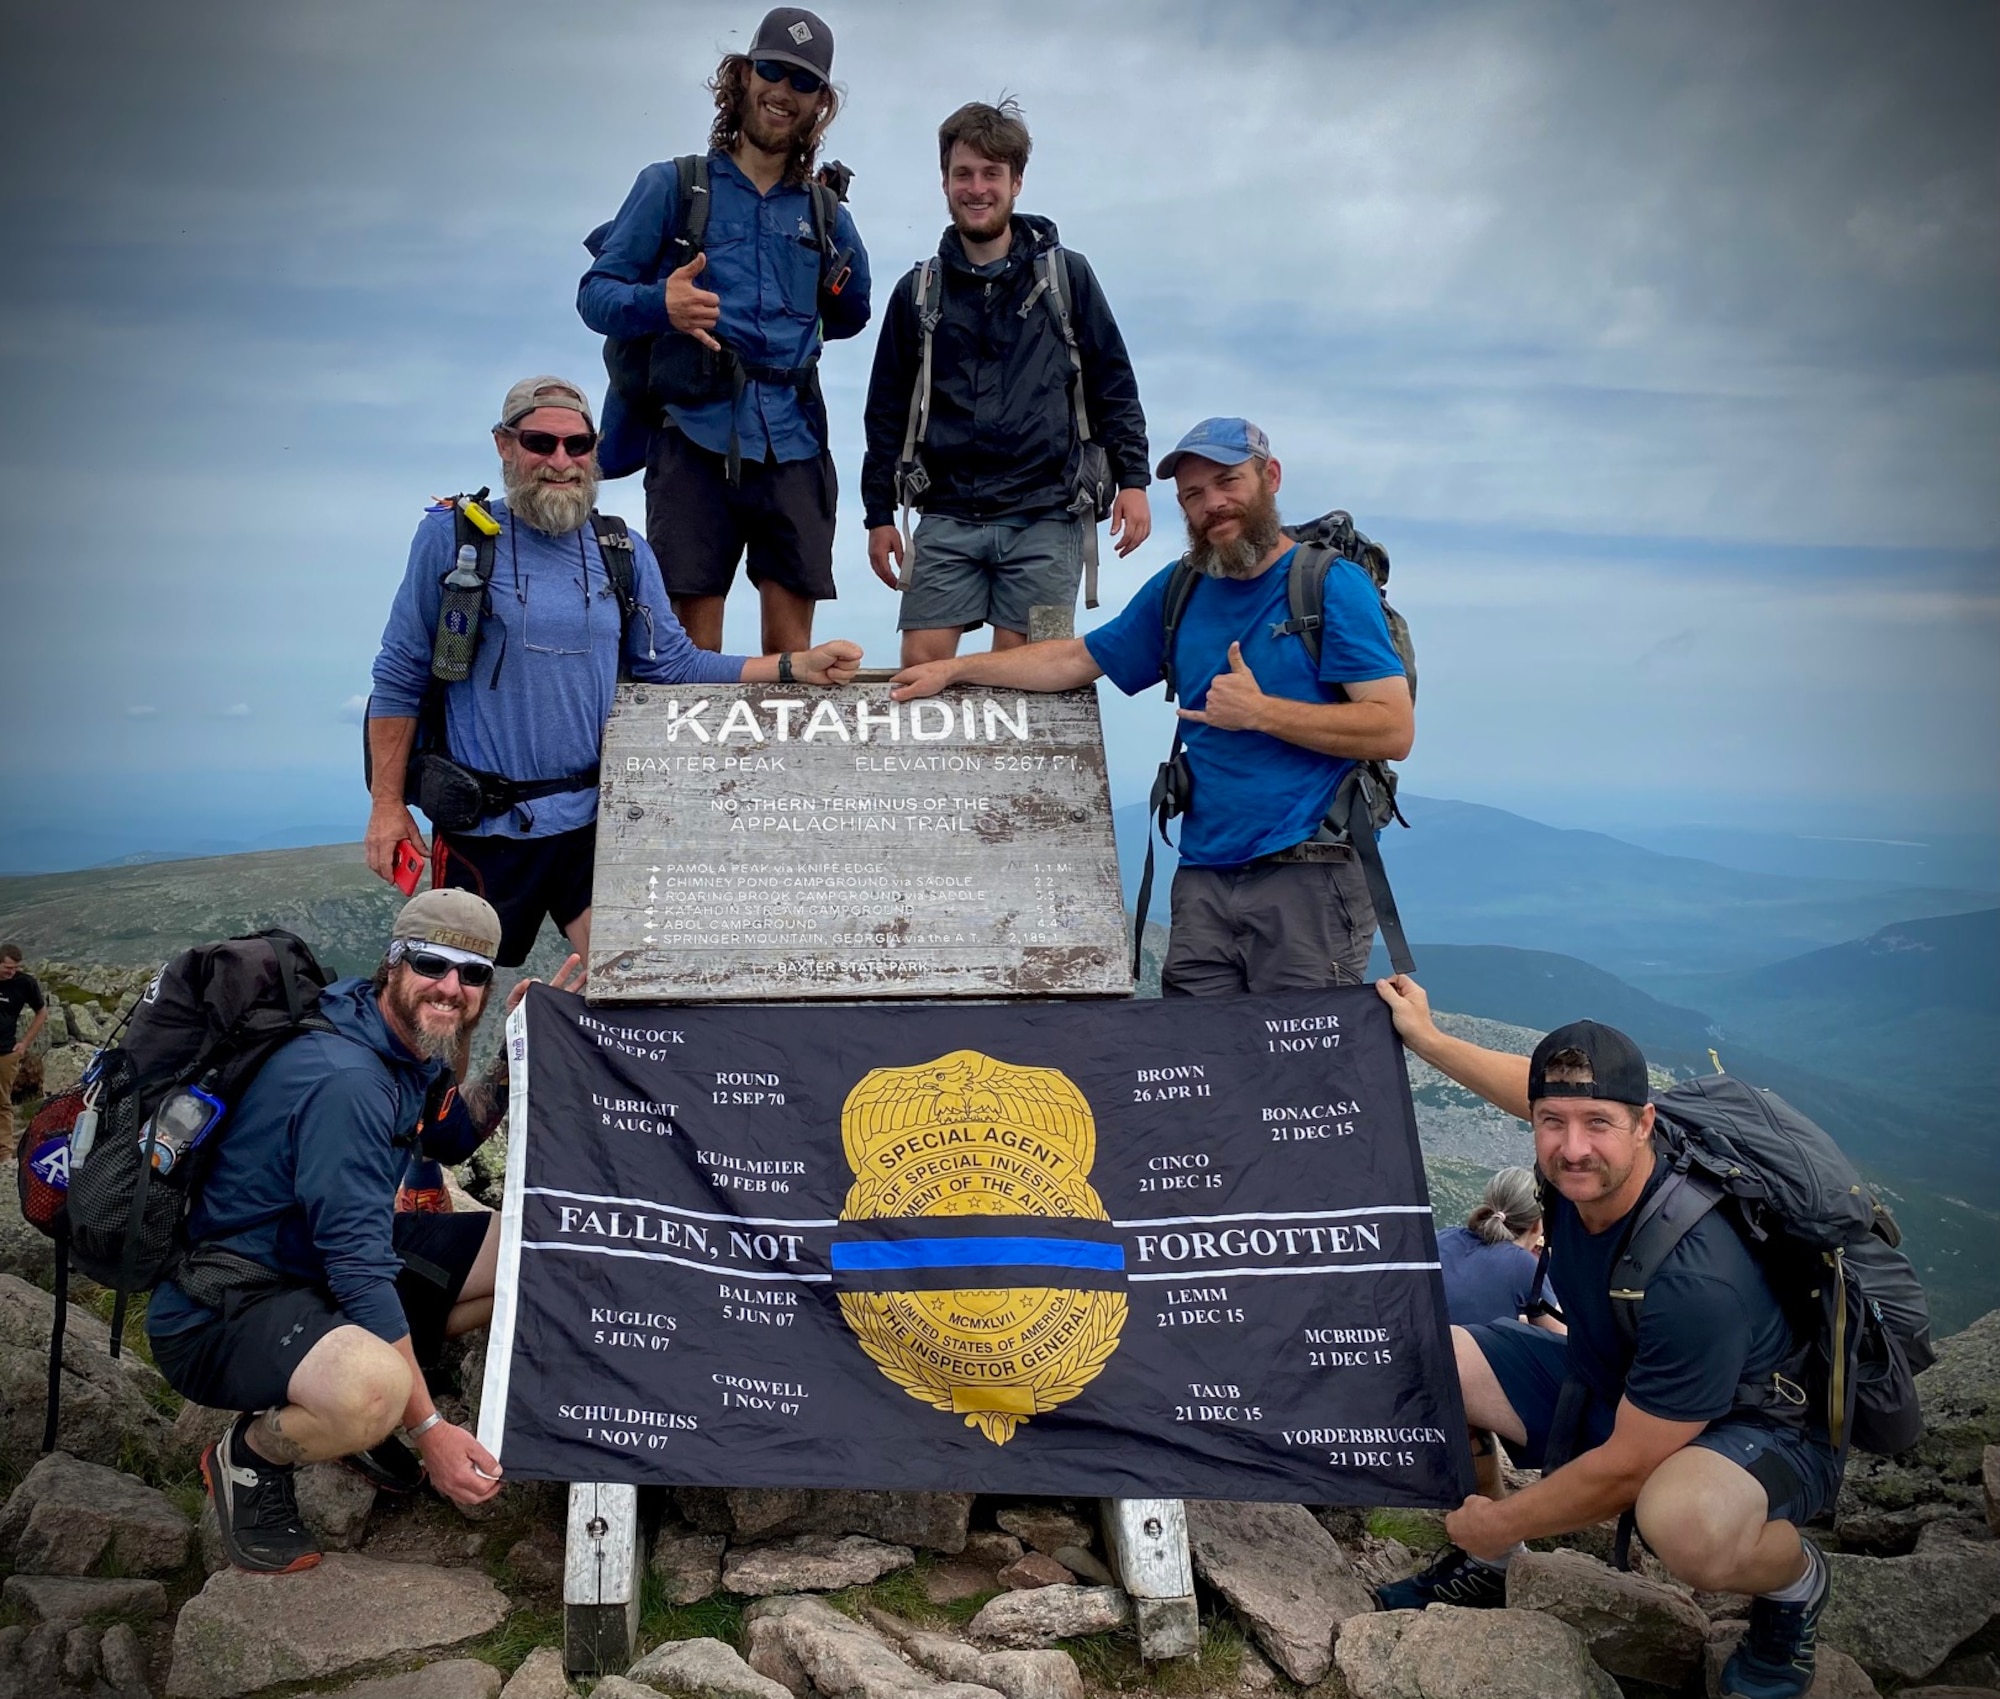 Senior Master Sgt. (Ret.) Greg Pfeiffer, a former OSI Special Agent who currently serves as a Junior Reserve Officers Training Corps instructor, raised $20,000 in charity while hiking the entire course of the Appalachian Trail in 2021